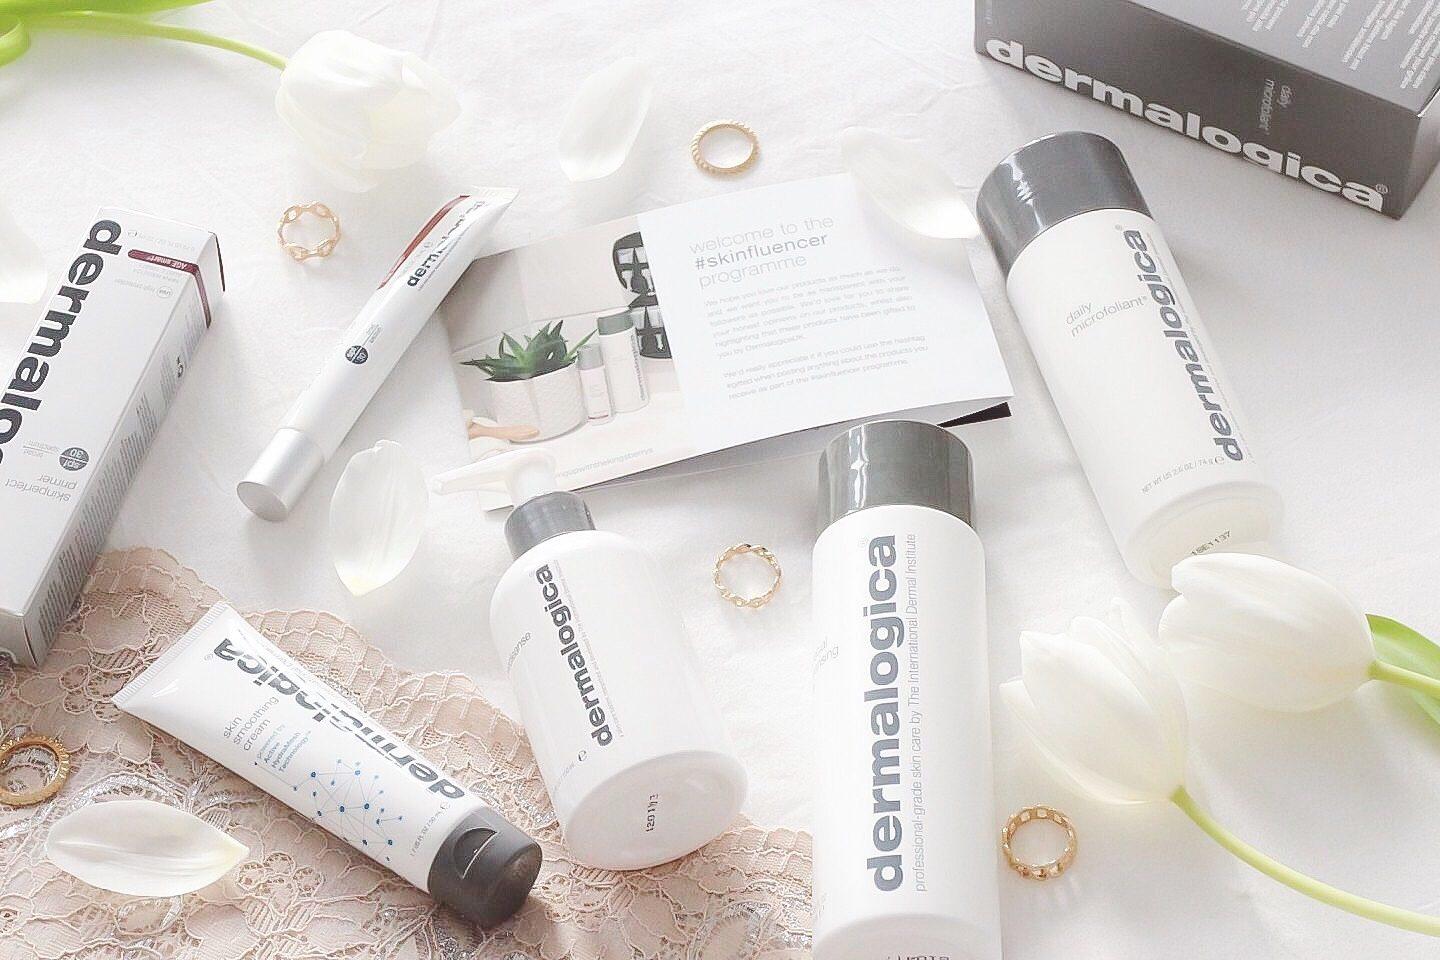  Case study: building an iconic brand with Dermalogica